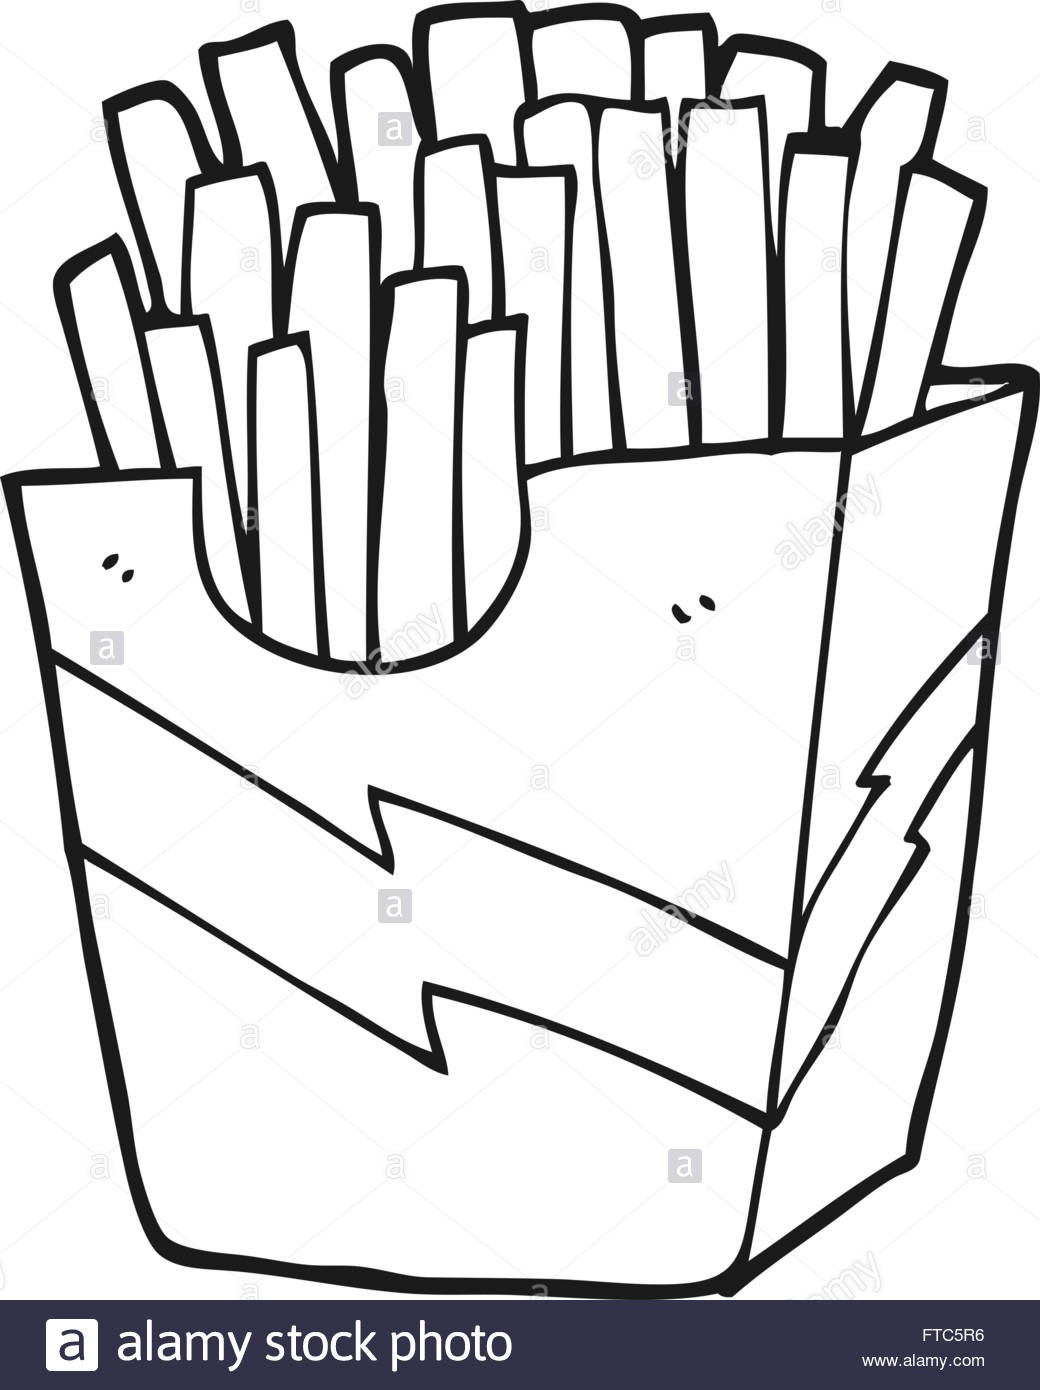 fries clipart coloring